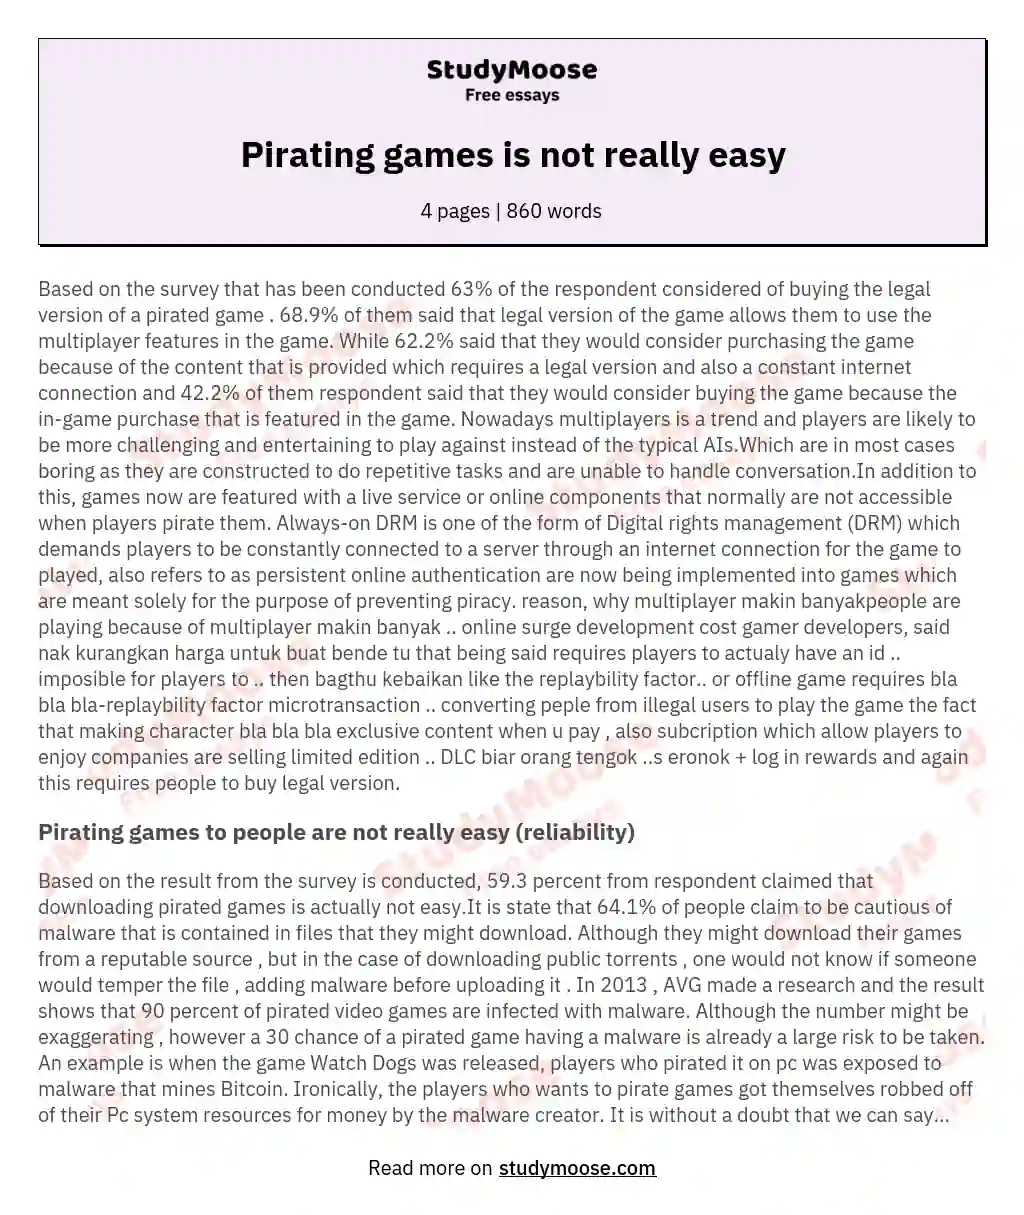 Pirating games is not really easy essay